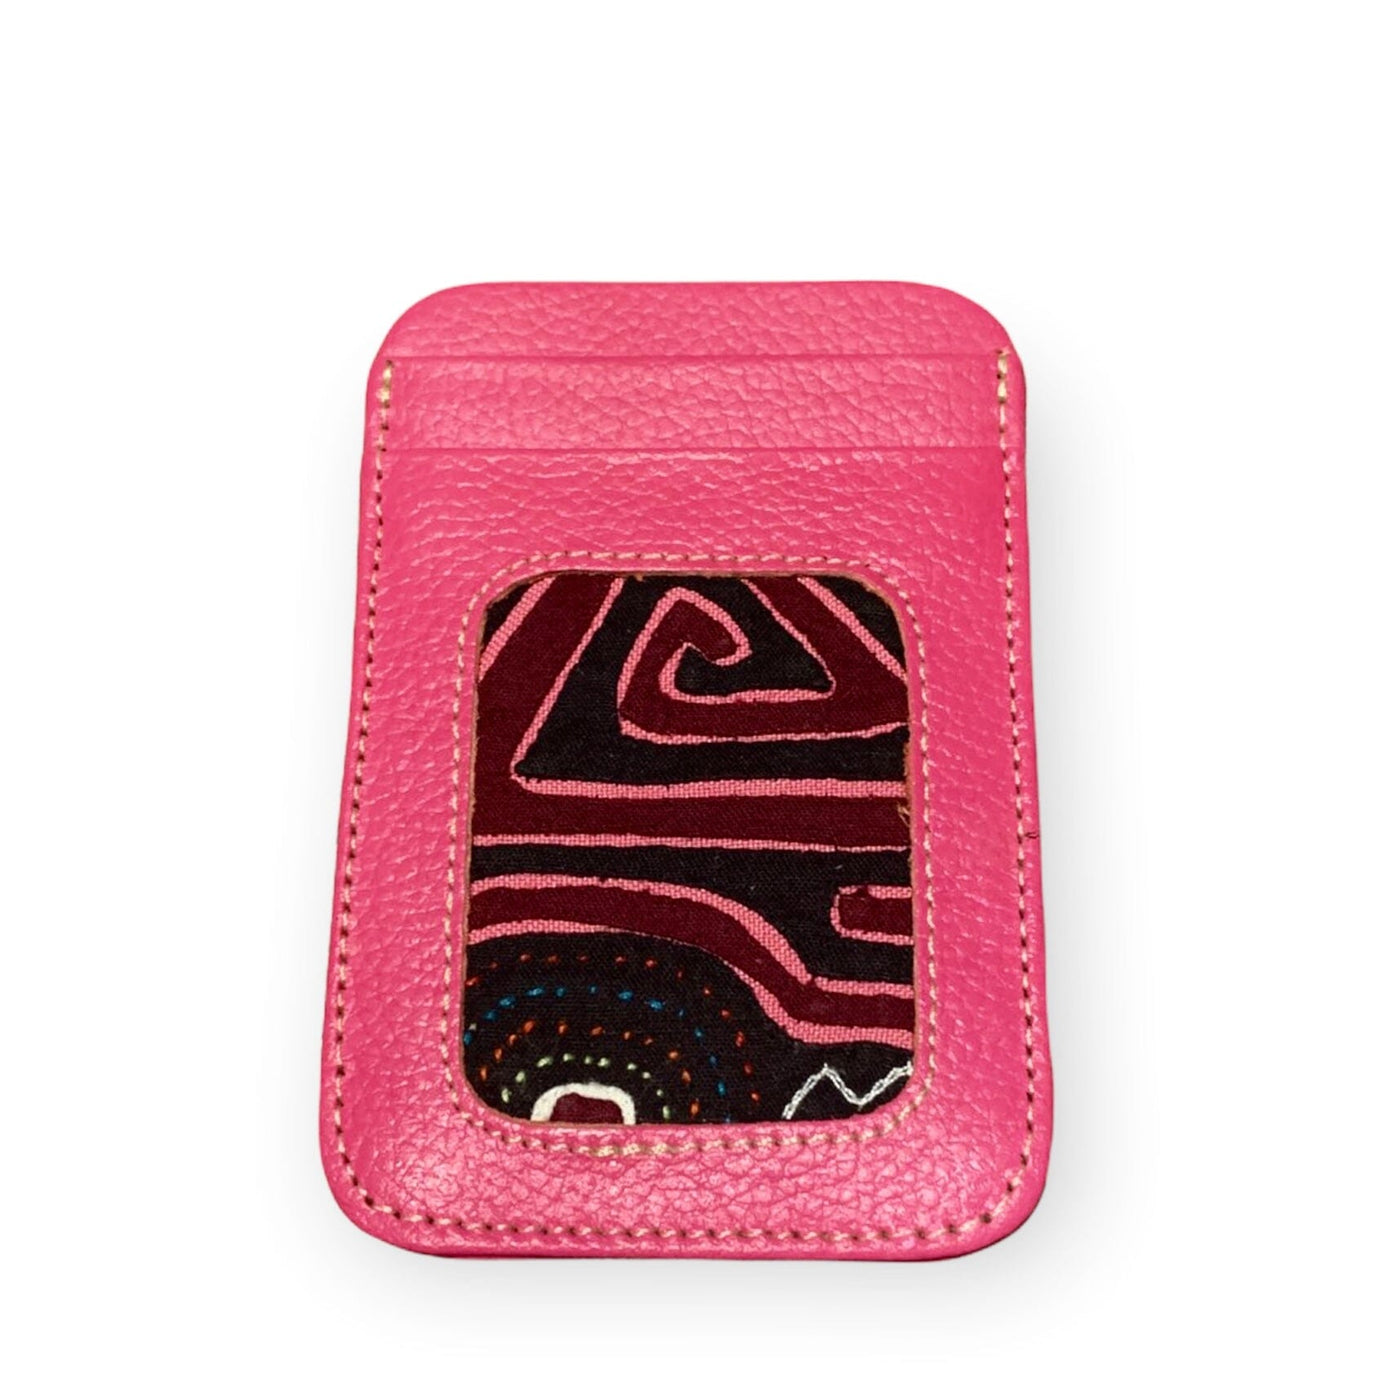 Colorful Leather Card Holders | Mola Embroidery Embroidered Wallet Hot Pink 